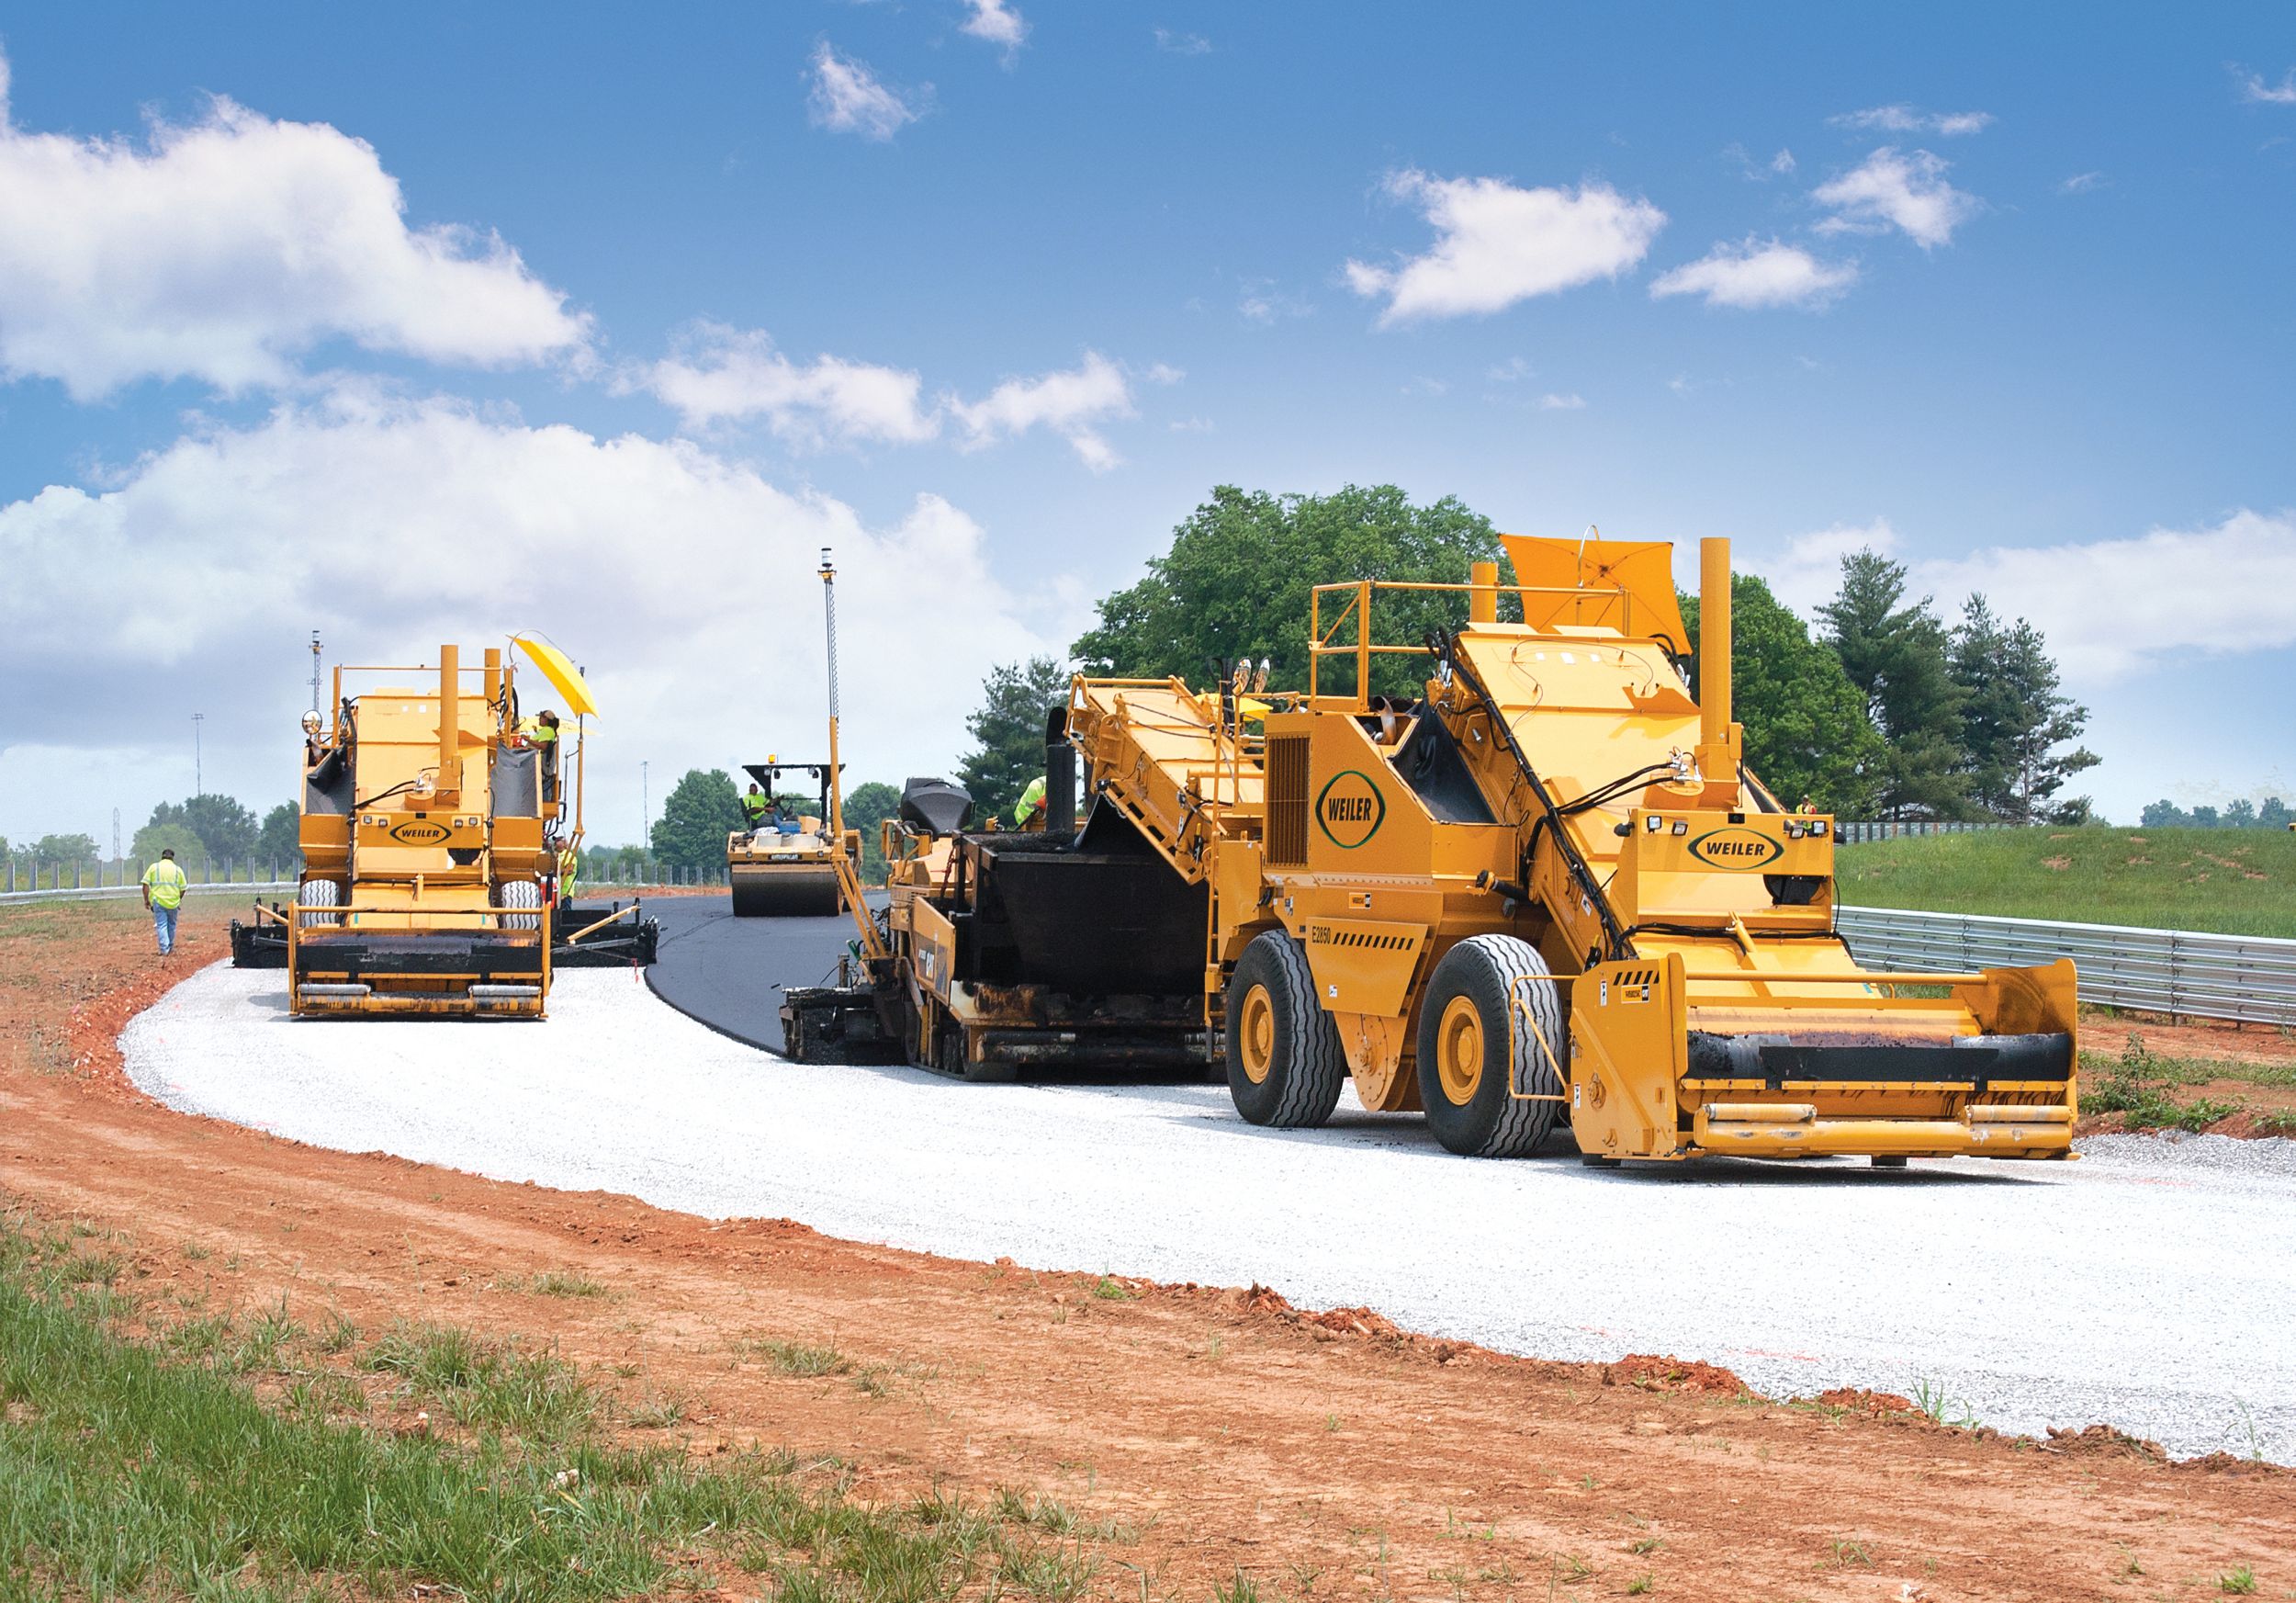 The use of Weiler E2850 Material Transfer Vehicles, and the non-contact paving they provide, was another smoothness effort.